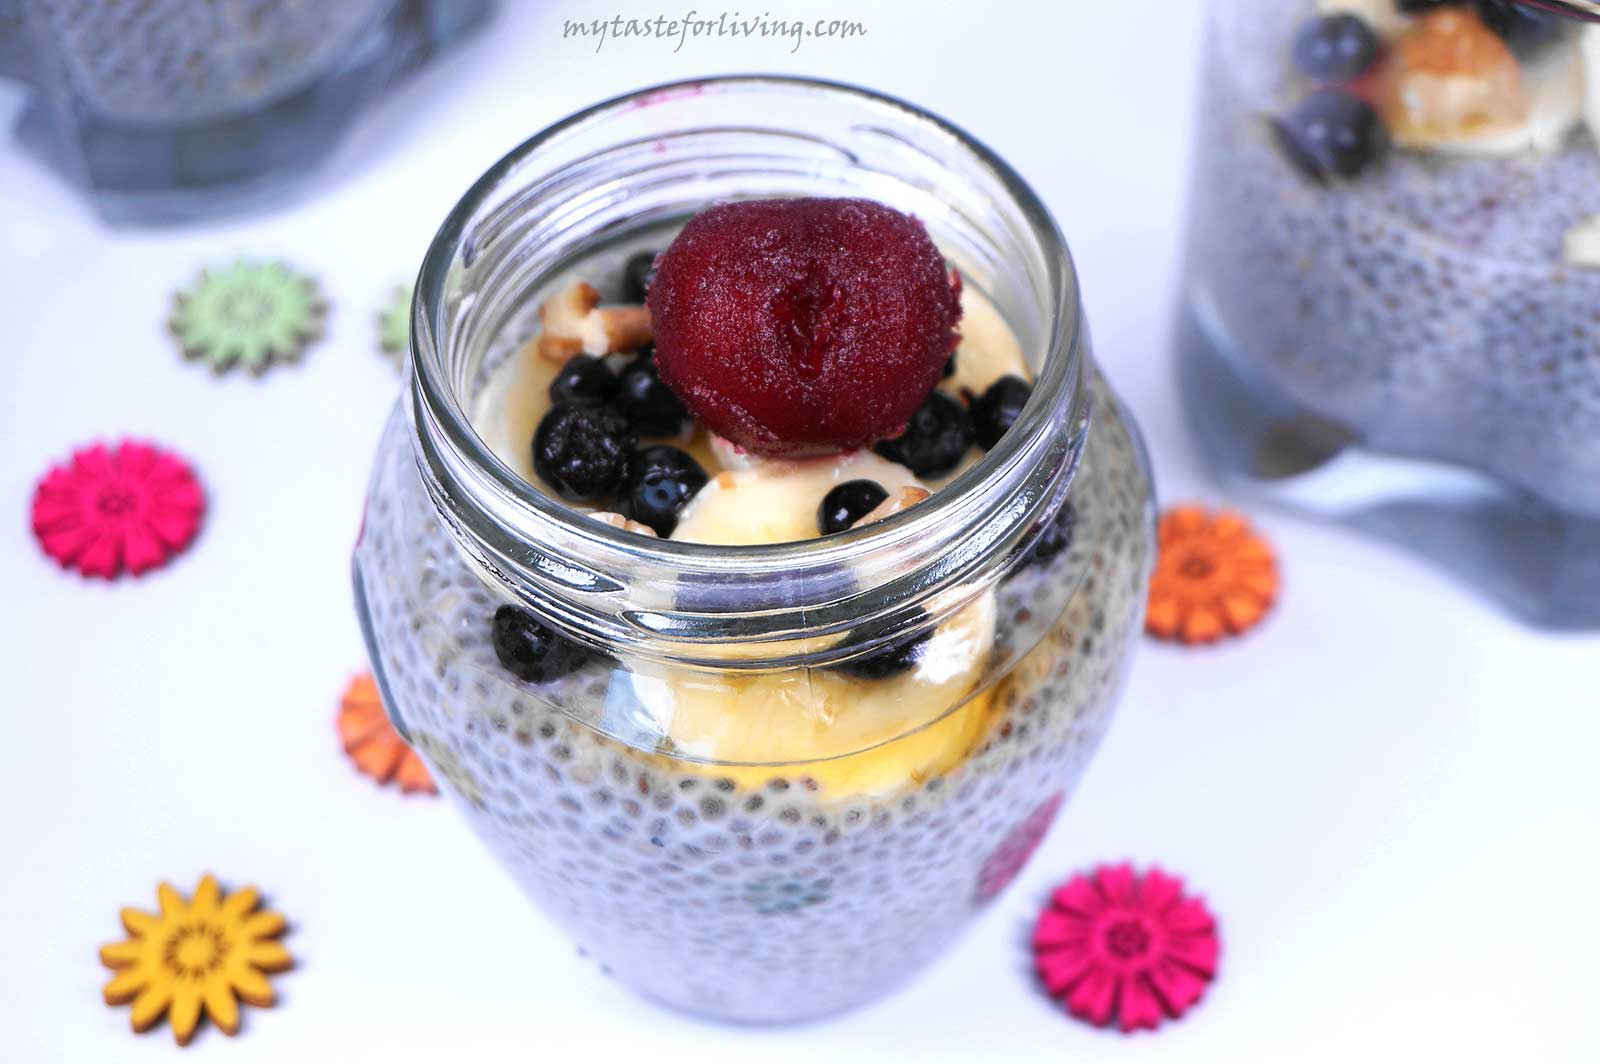 Vegan suggestion for chia pudding made with coconut milk. I prefer to prepare it with coconut milk, but you can replace it with almond, oat or cashew milk, according to your taste and choice. Chia pudding is suitable for breakfast or dessert. With the topping, you can completely improvise - all kinds of fruits, nuts, cinnamon, cocoa, maple syrup, honey or chocolate.